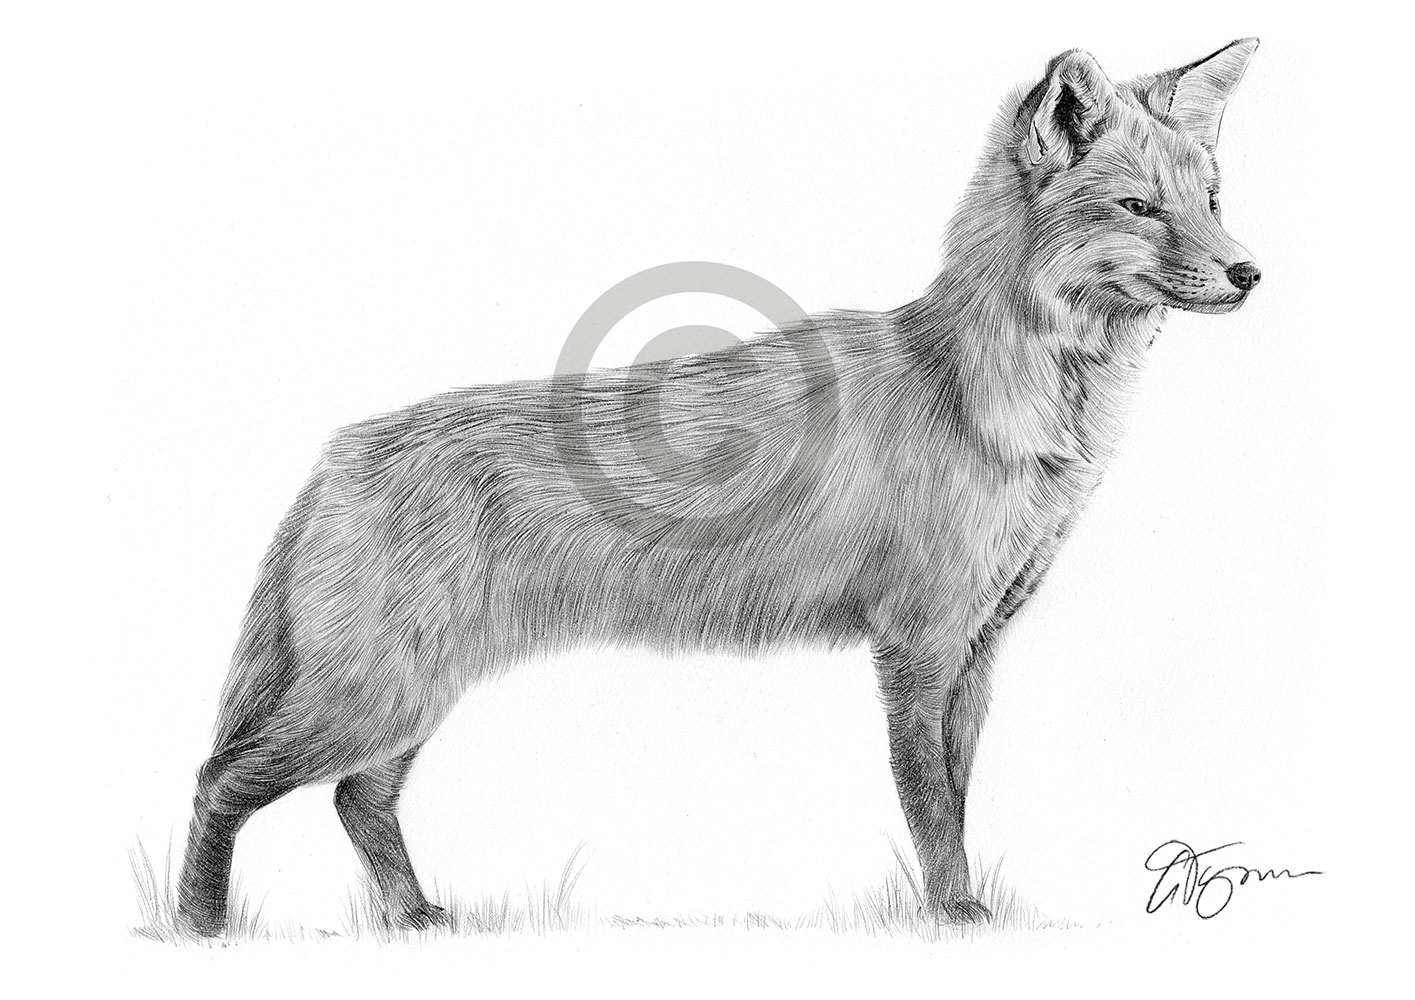 Pencil drawing of a red fox in landscape by artist Gary Tymon